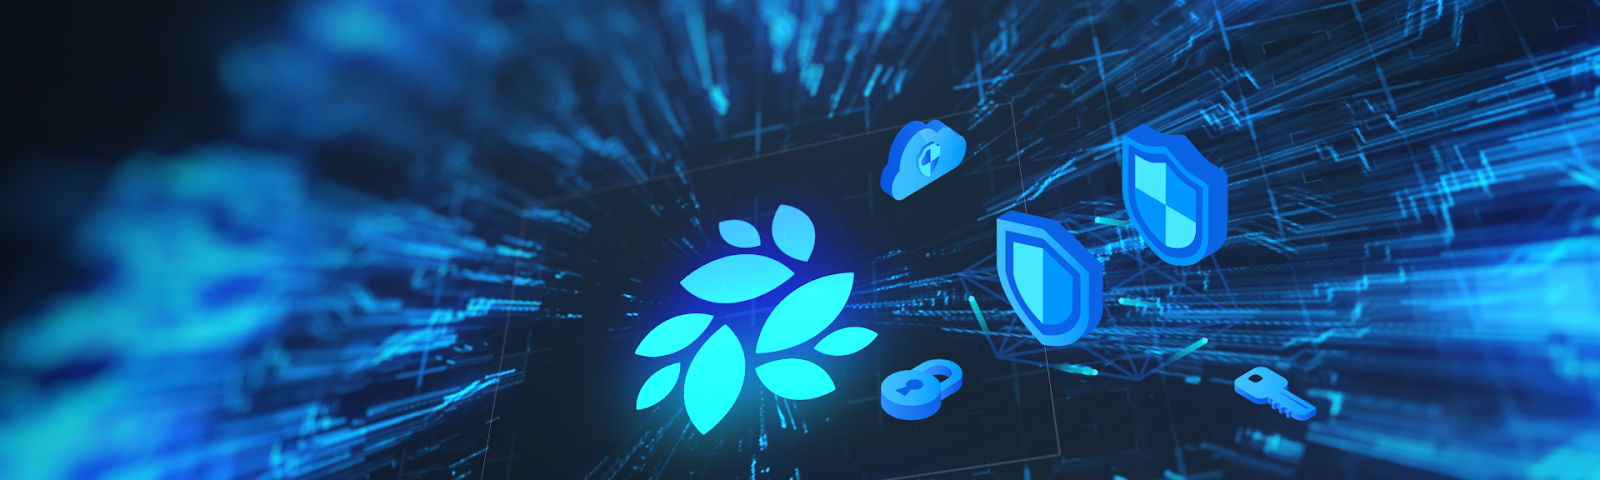 NKN successfully completes security audit